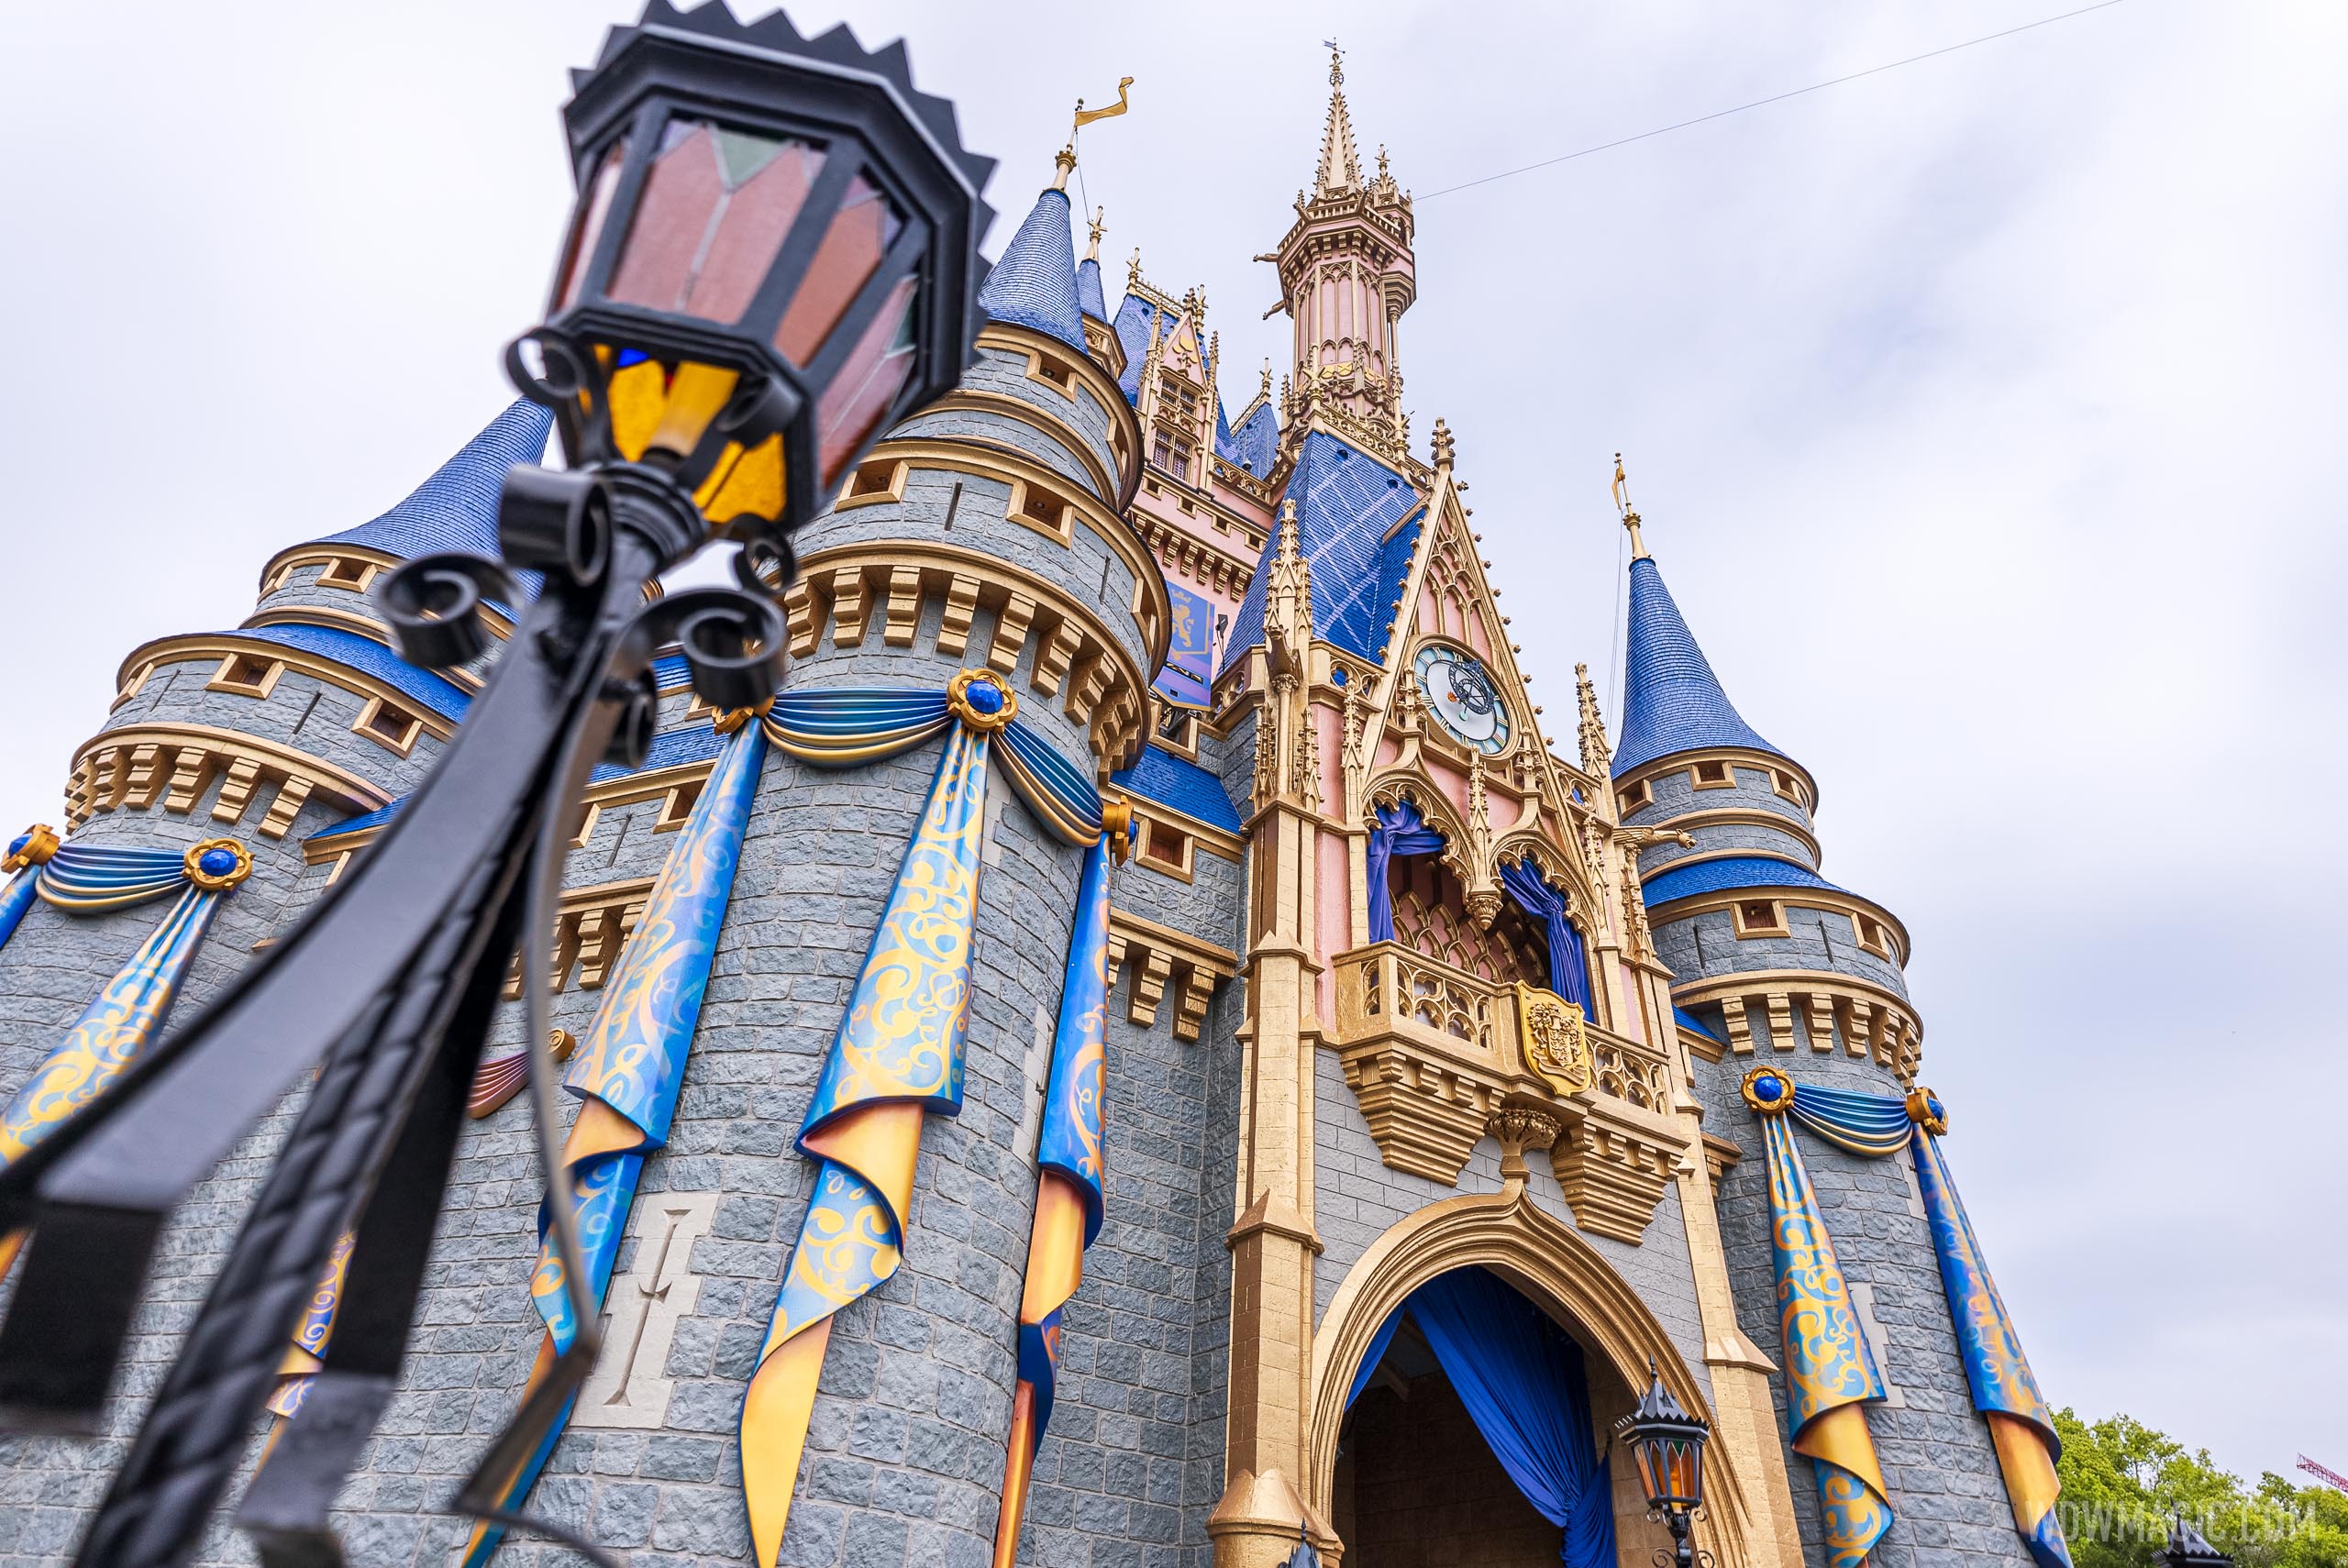 Magic Kingdom gains 4 hours per day on most days